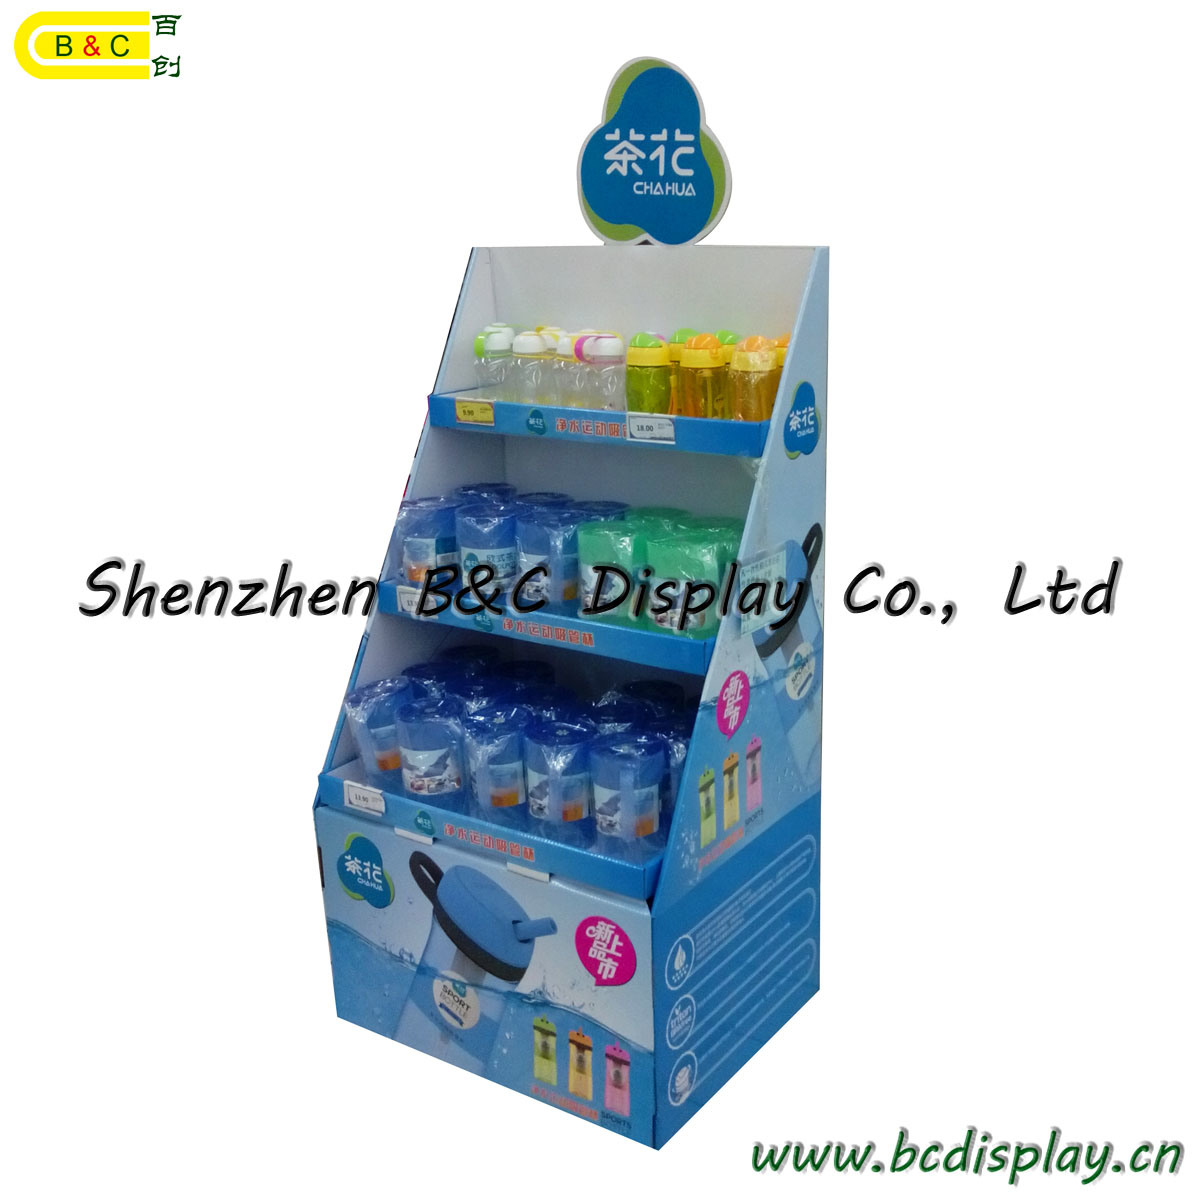 The Cups Paper Display Stands (B&C-A088)